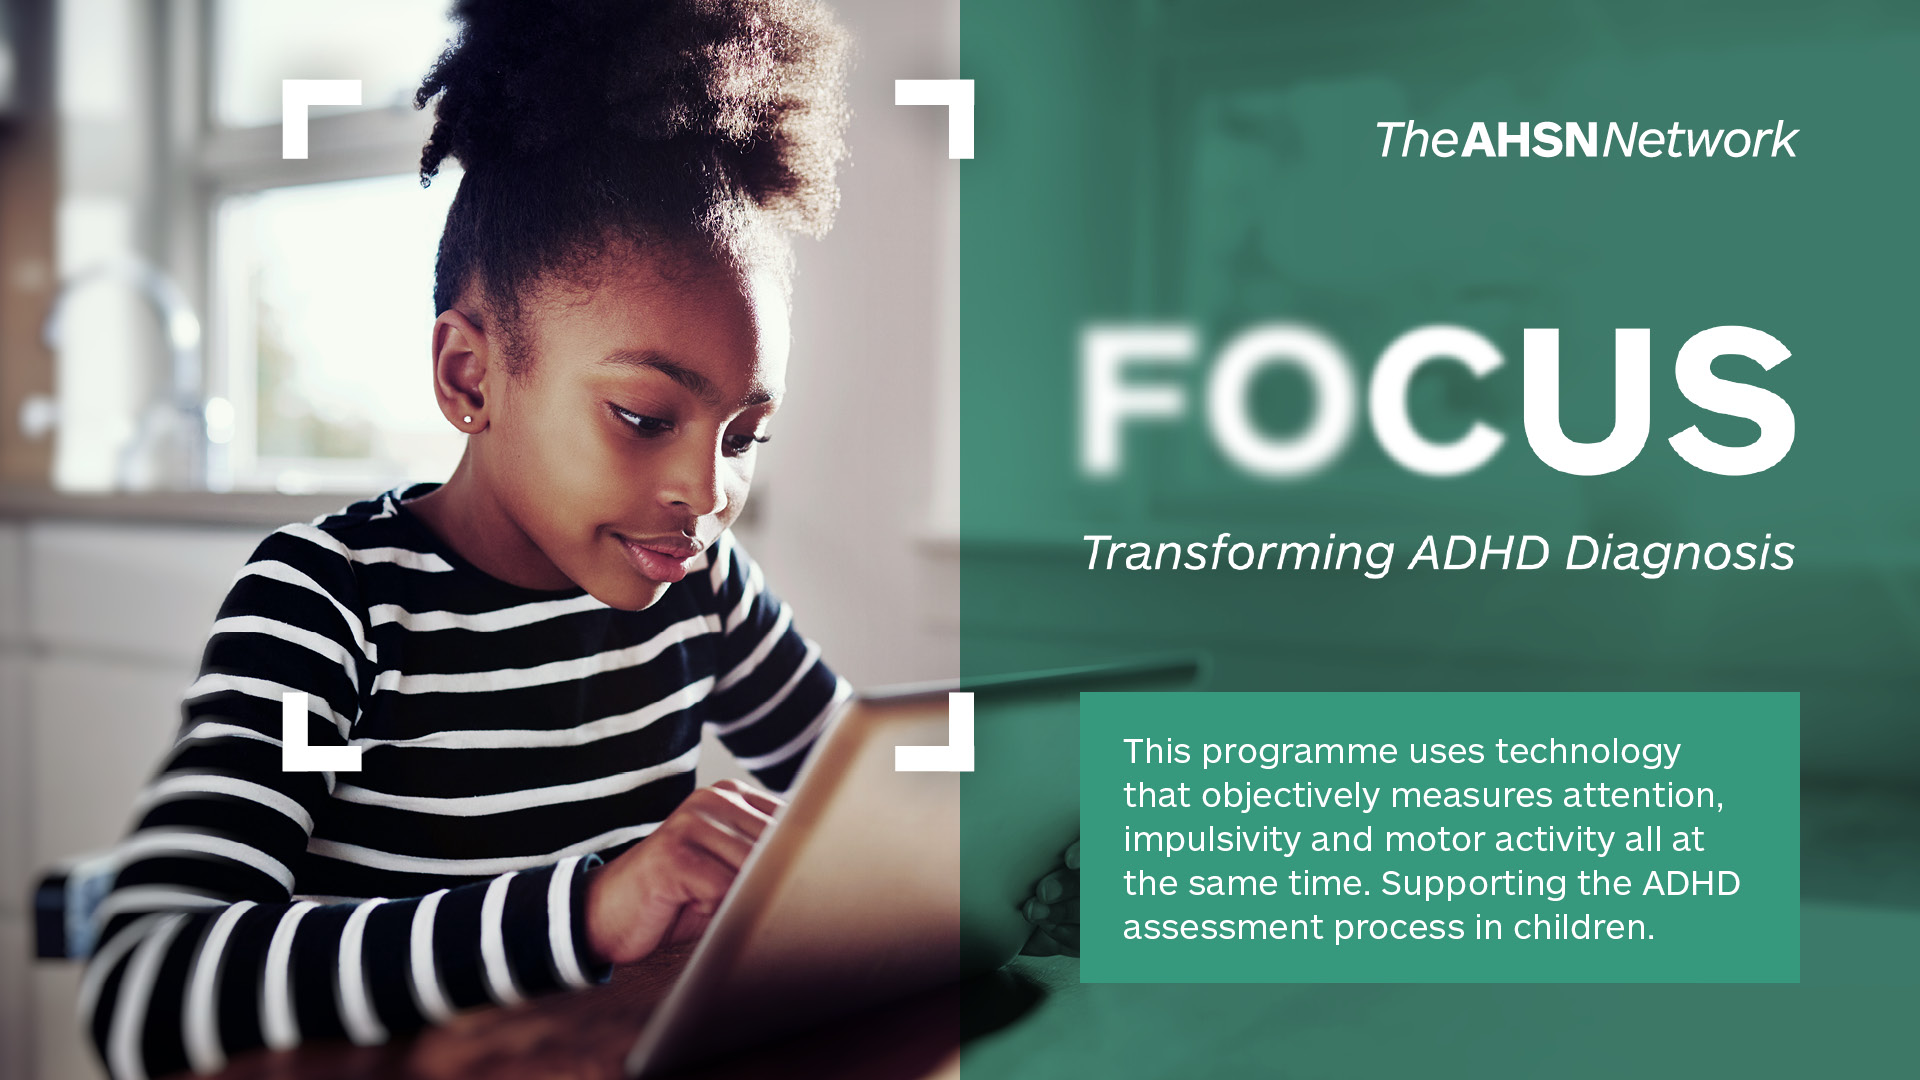 The AHSN Network logo. FOCUS Transforming ADHD Diagnosis. This programme uses technology that objectively measures attention, impulsivity and motor activity all at the same time. Supporting the ADHD assessment process in children.